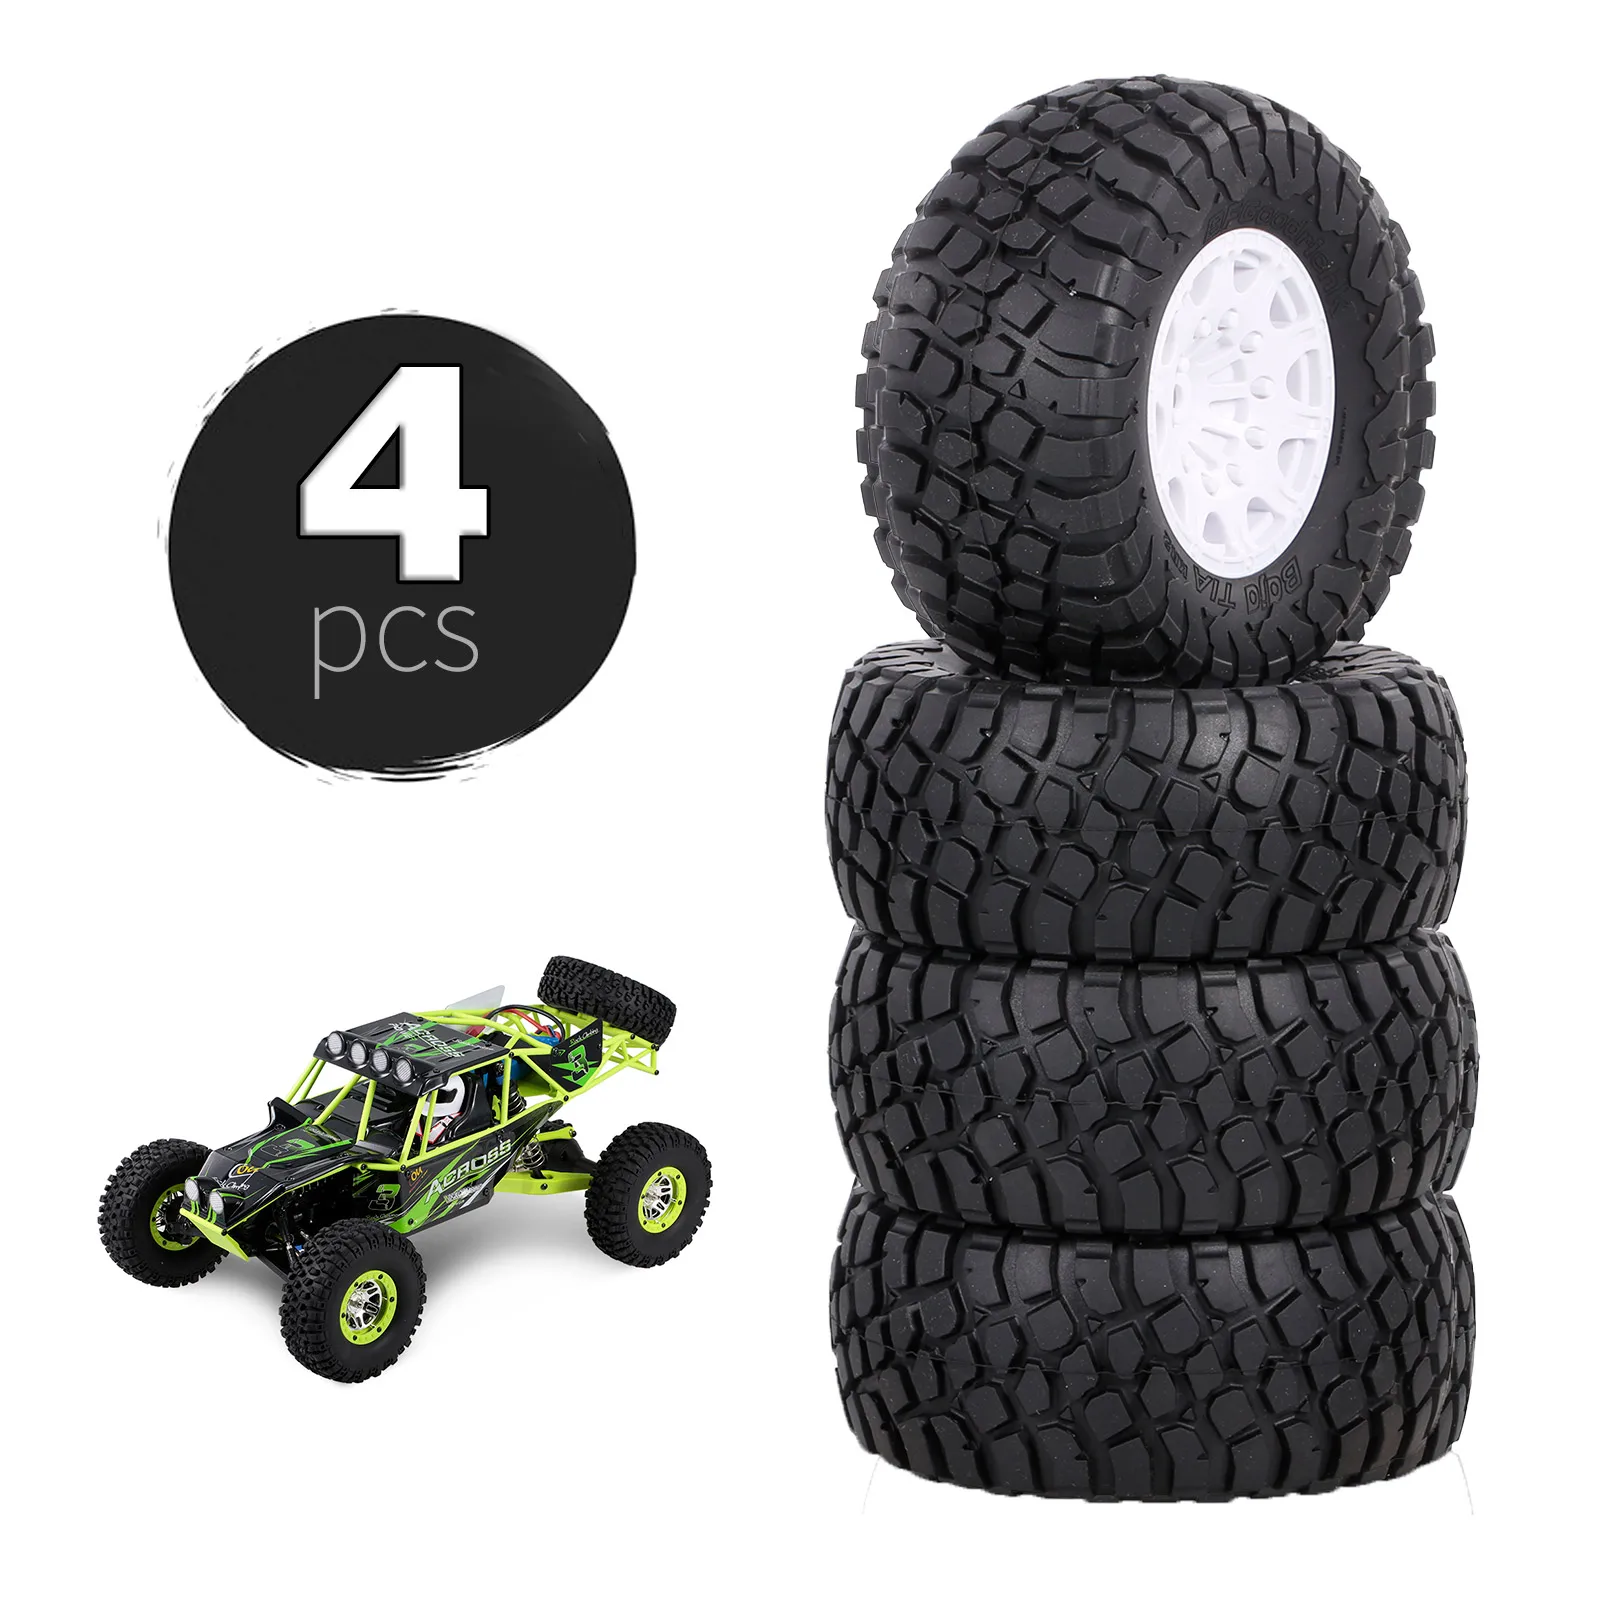 4 pcs 110mm 1/10 RC Car Truck Short Course Truck Off-road Vehicle Tyres RC  Wheel Compatible with Traxxas Tamiya Kyosho RC Car - AliExpress Toys &  Hobbies